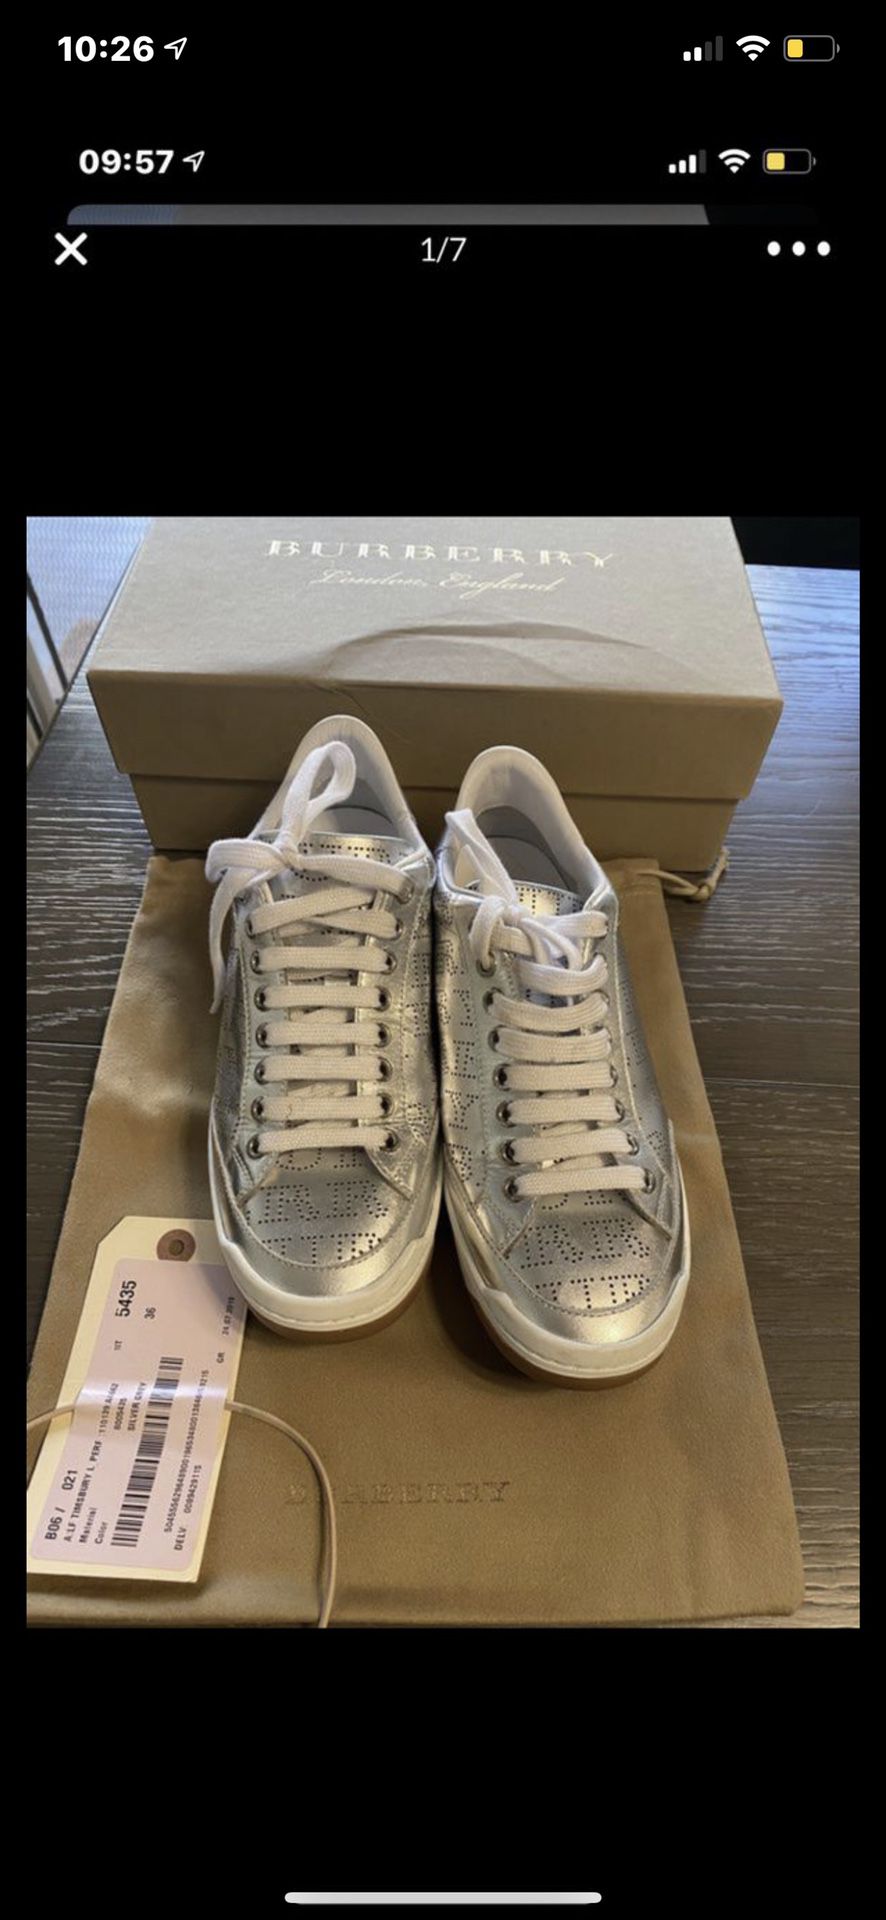 Burberry size 6